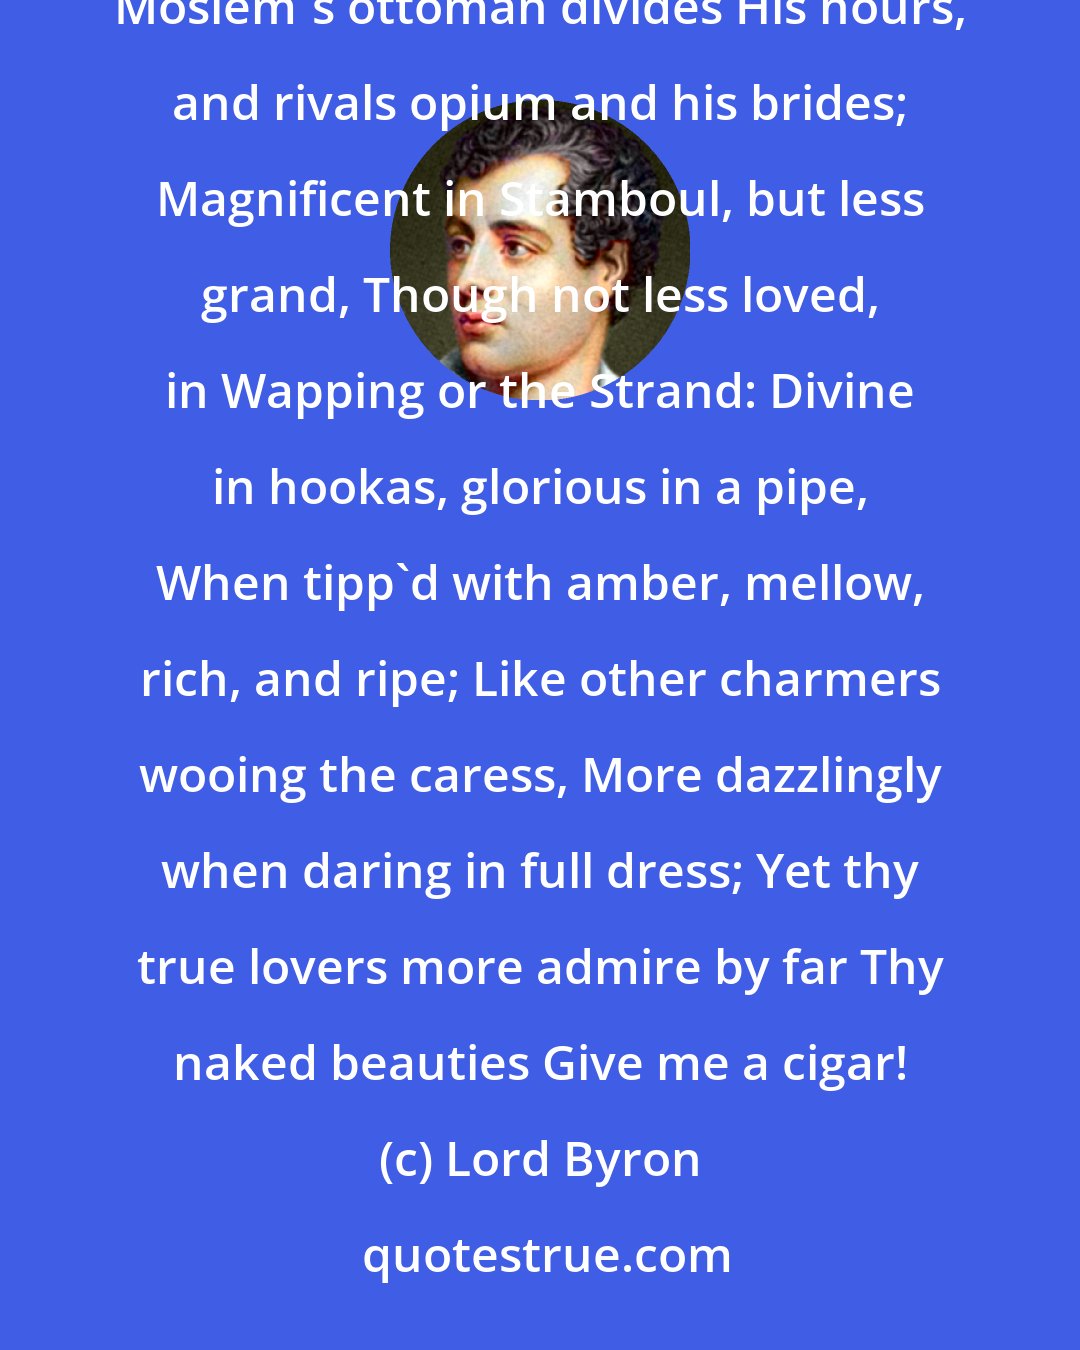 Lord Byron: Sublime tobacco! which from east to west, Cheers the tar's labour or the Turkman's rest; Which on the Moslem's ottoman divides His hours, and rivals opium and his brides; Magnificent in Stamboul, but less grand, Though not less loved, in Wapping or the Strand: Divine in hookas, glorious in a pipe, When tipp'd with amber, mellow, rich, and ripe; Like other charmers wooing the caress, More dazzlingly when daring in full dress; Yet thy true lovers more admire by far Thy naked beauties Give me a cigar!